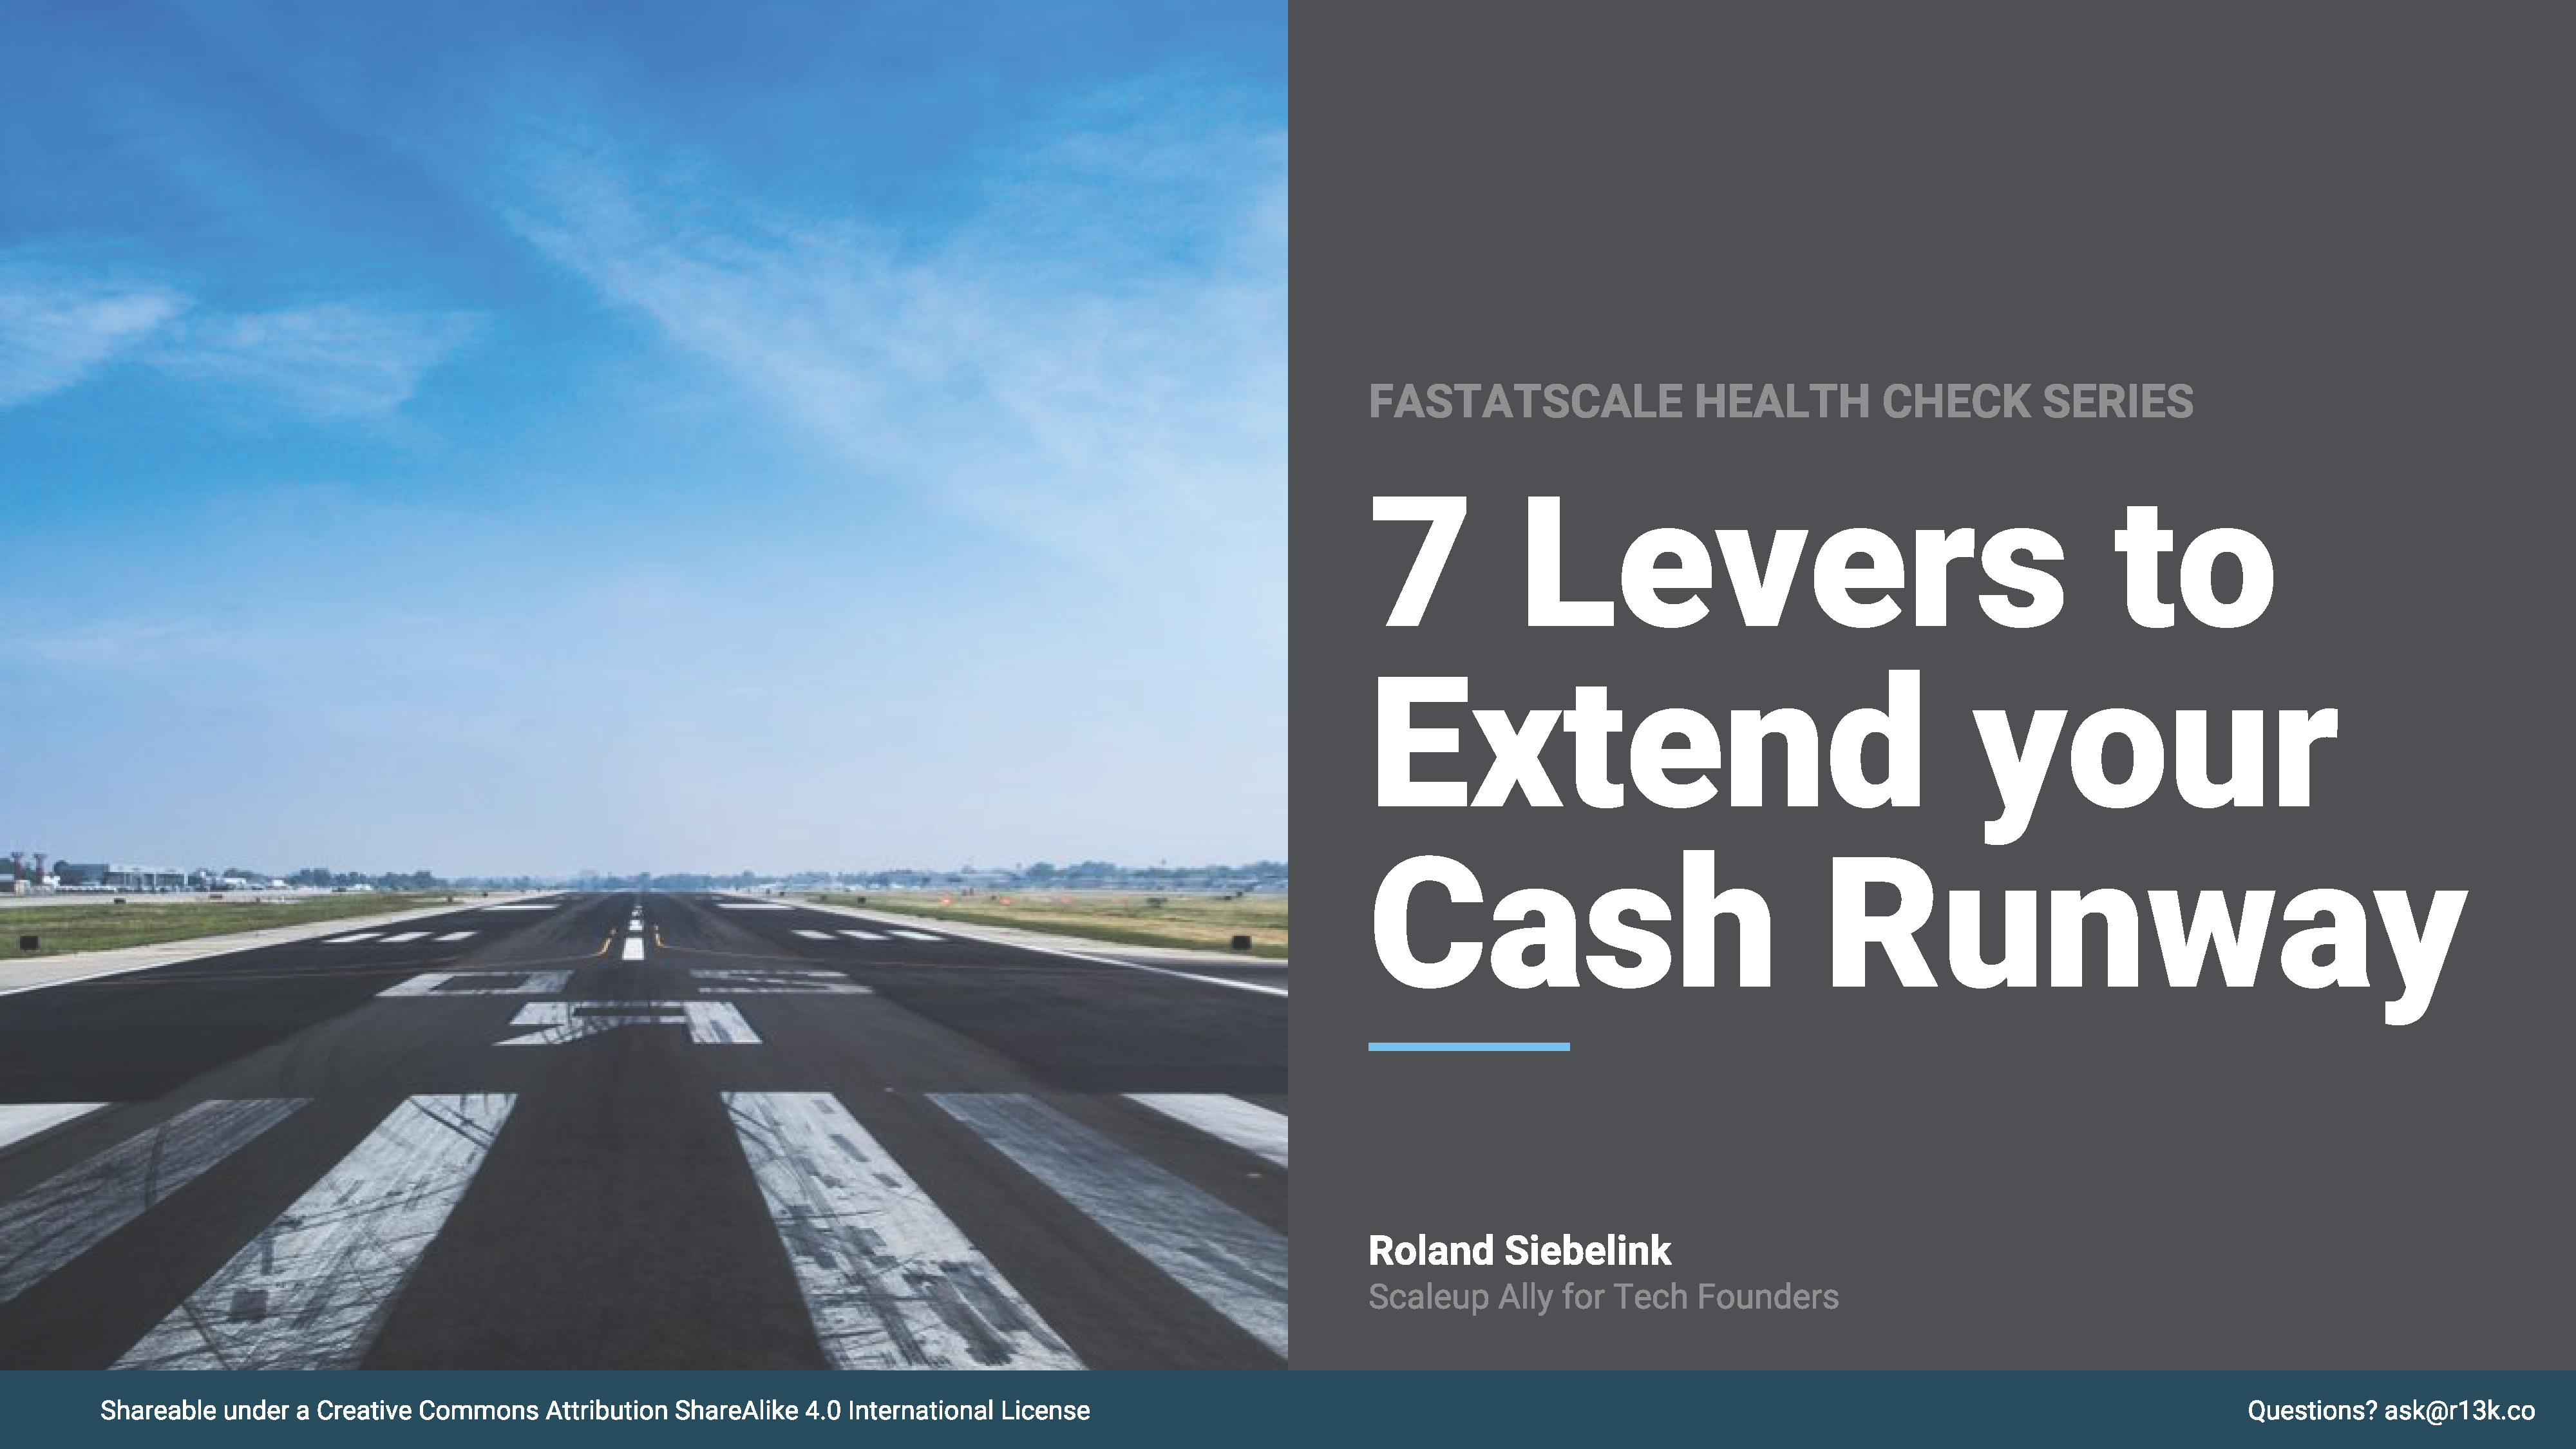 7 Levers to Extend your Cash Runway Mastering Cash Flow: The 7 Levers for Prolonged Financial Resilience